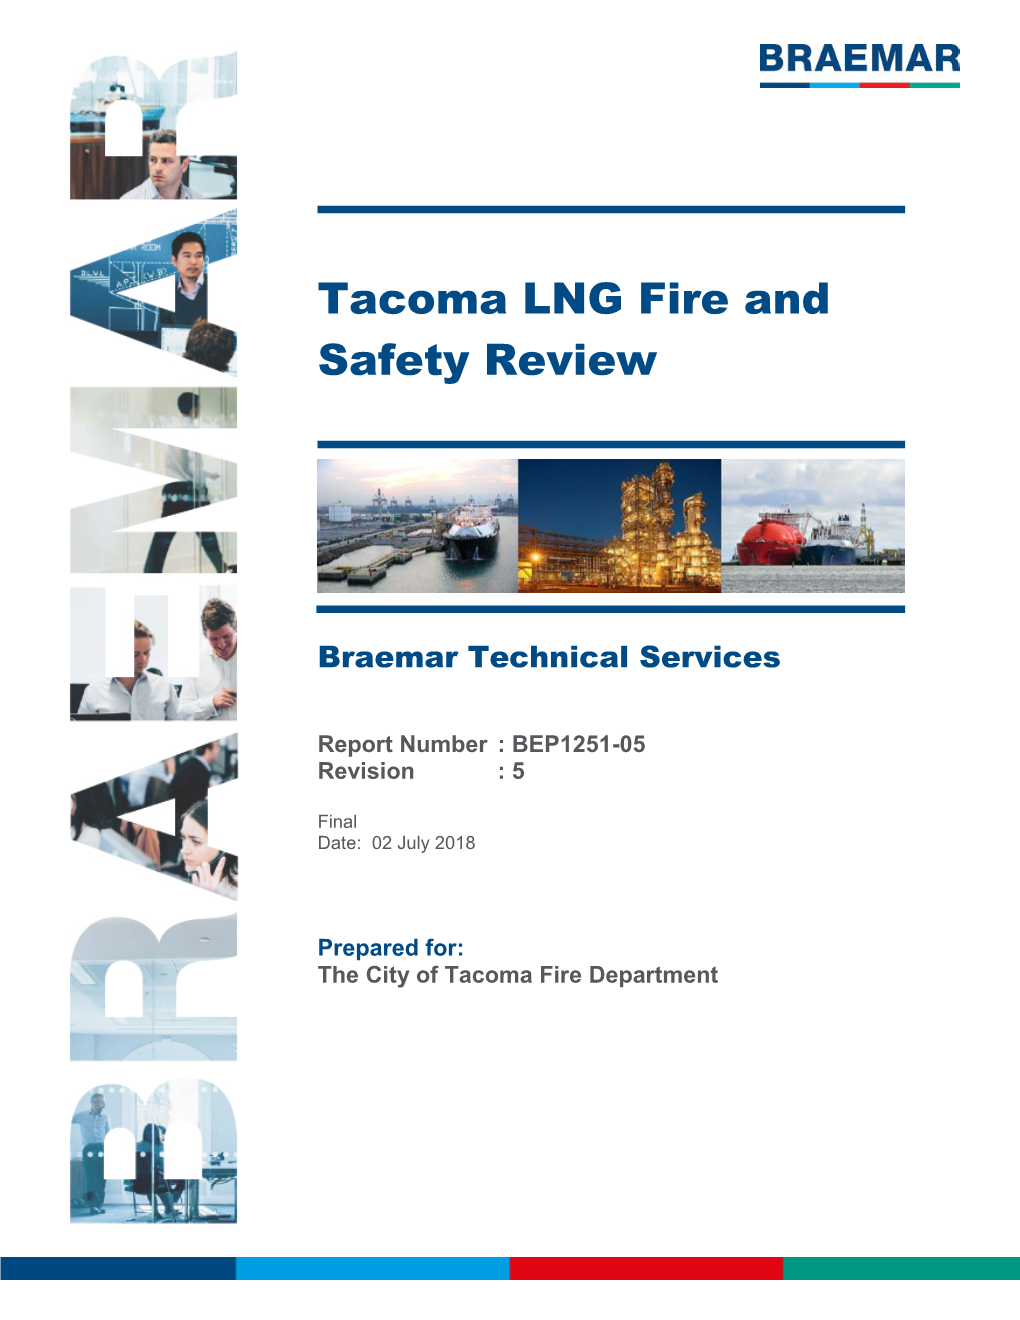 Tacoma LNG Fire and Safety Review